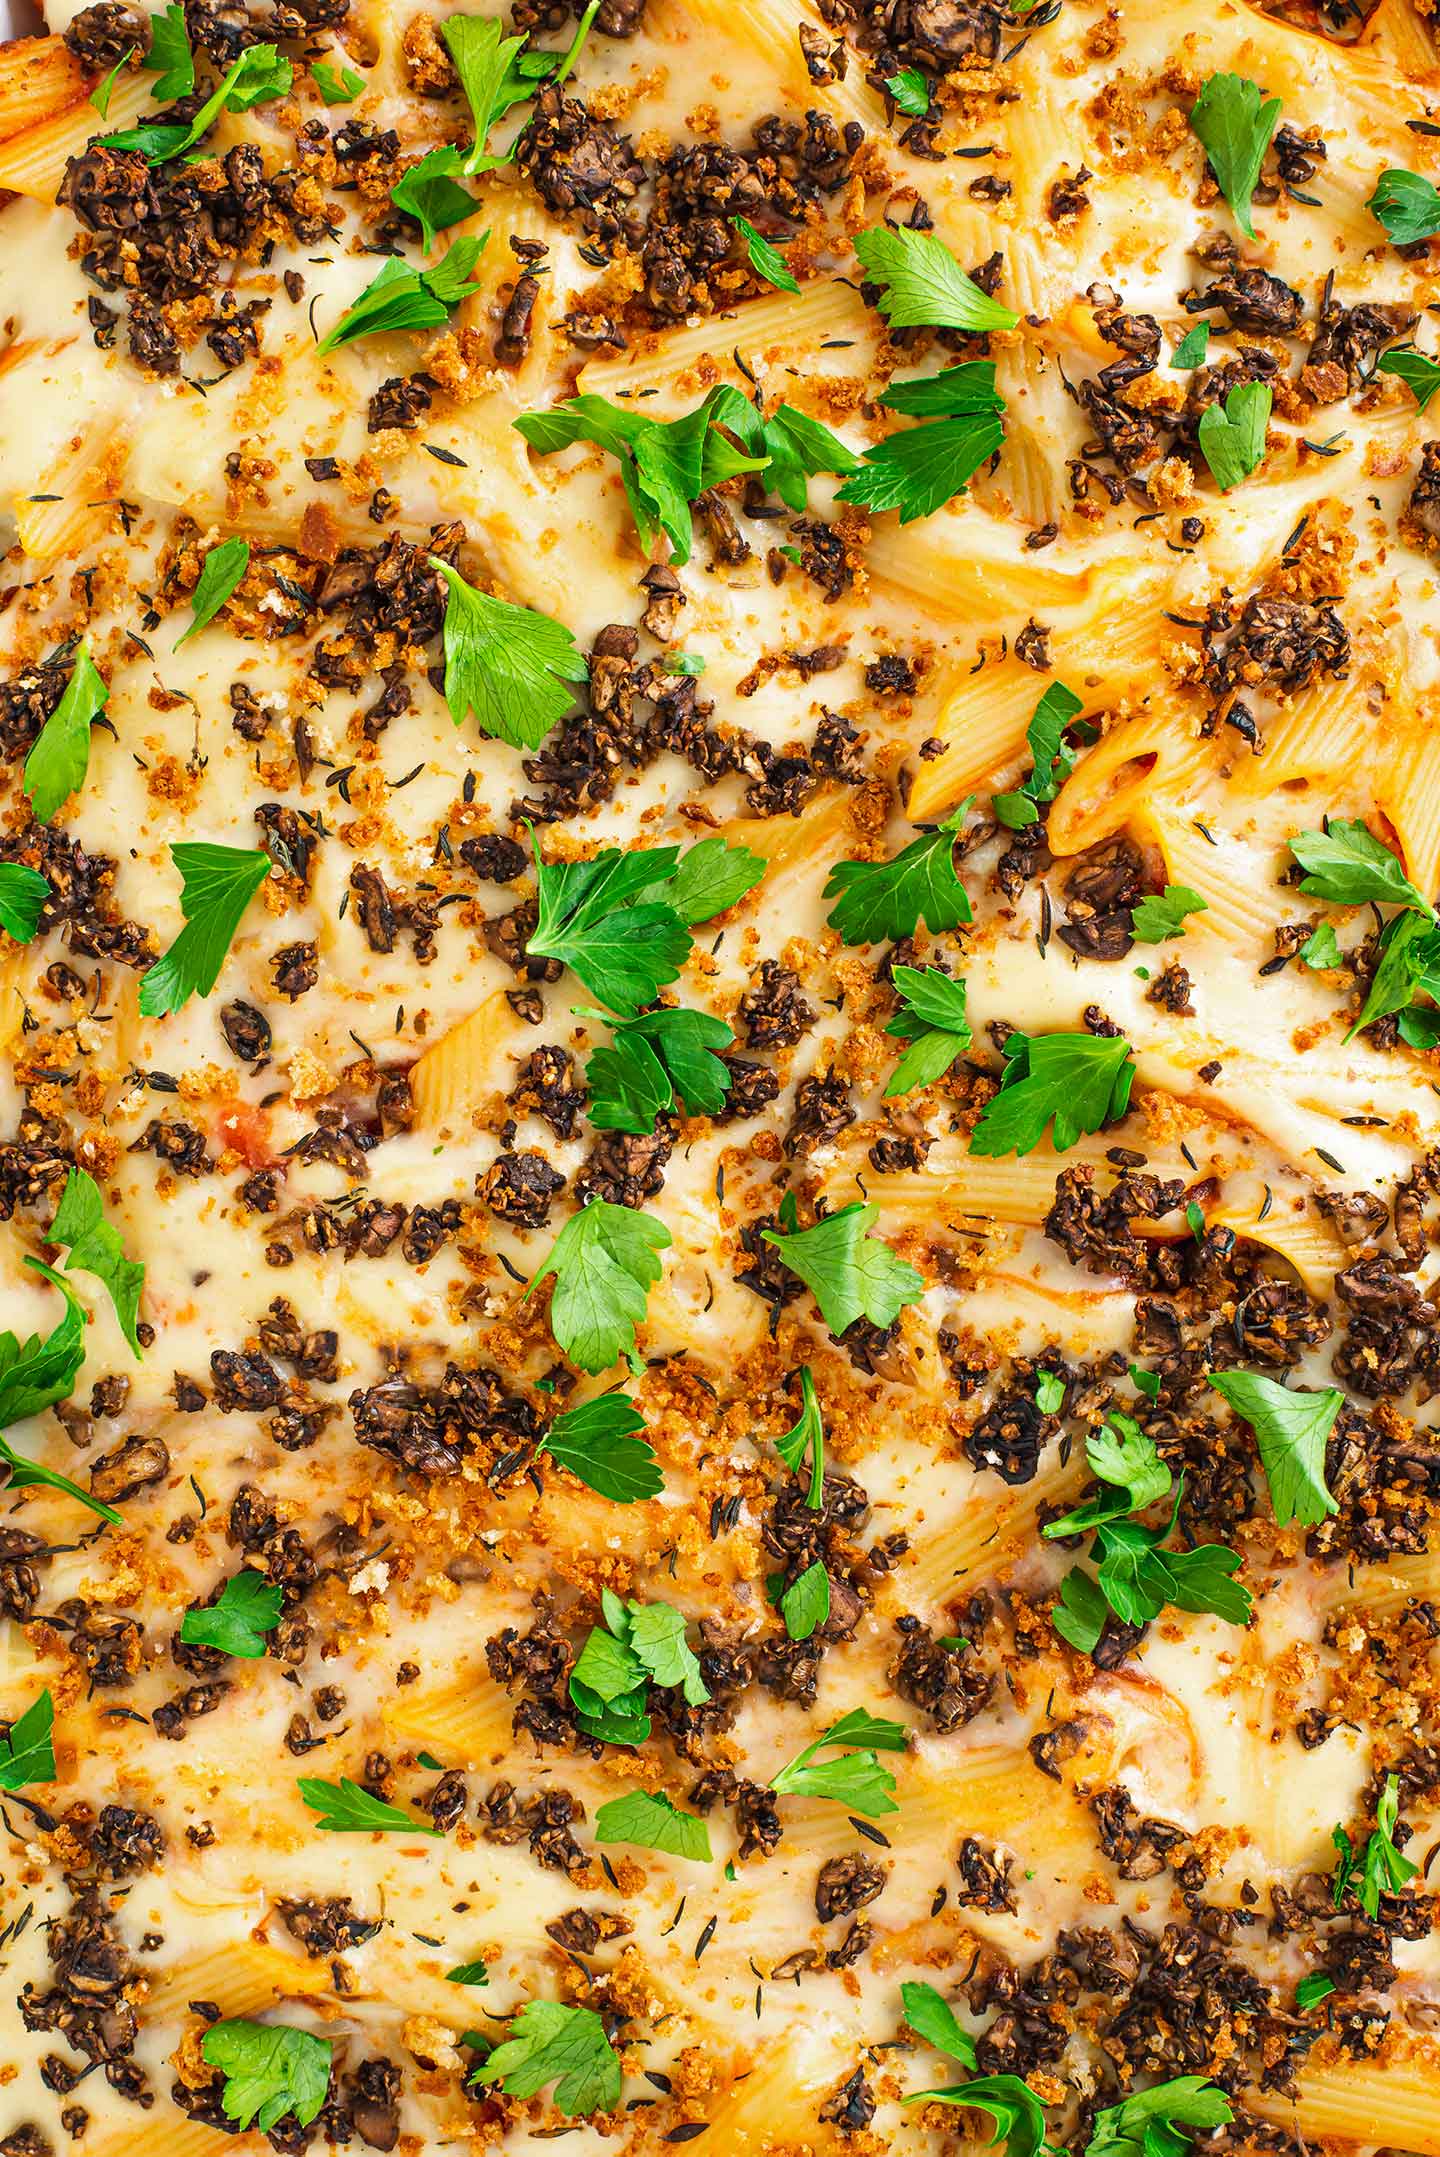 Top down view of ziti casserole filling the entire image. "Cheesy" bechamel, fresh parsley, and crispy mushrooms garnish the top.